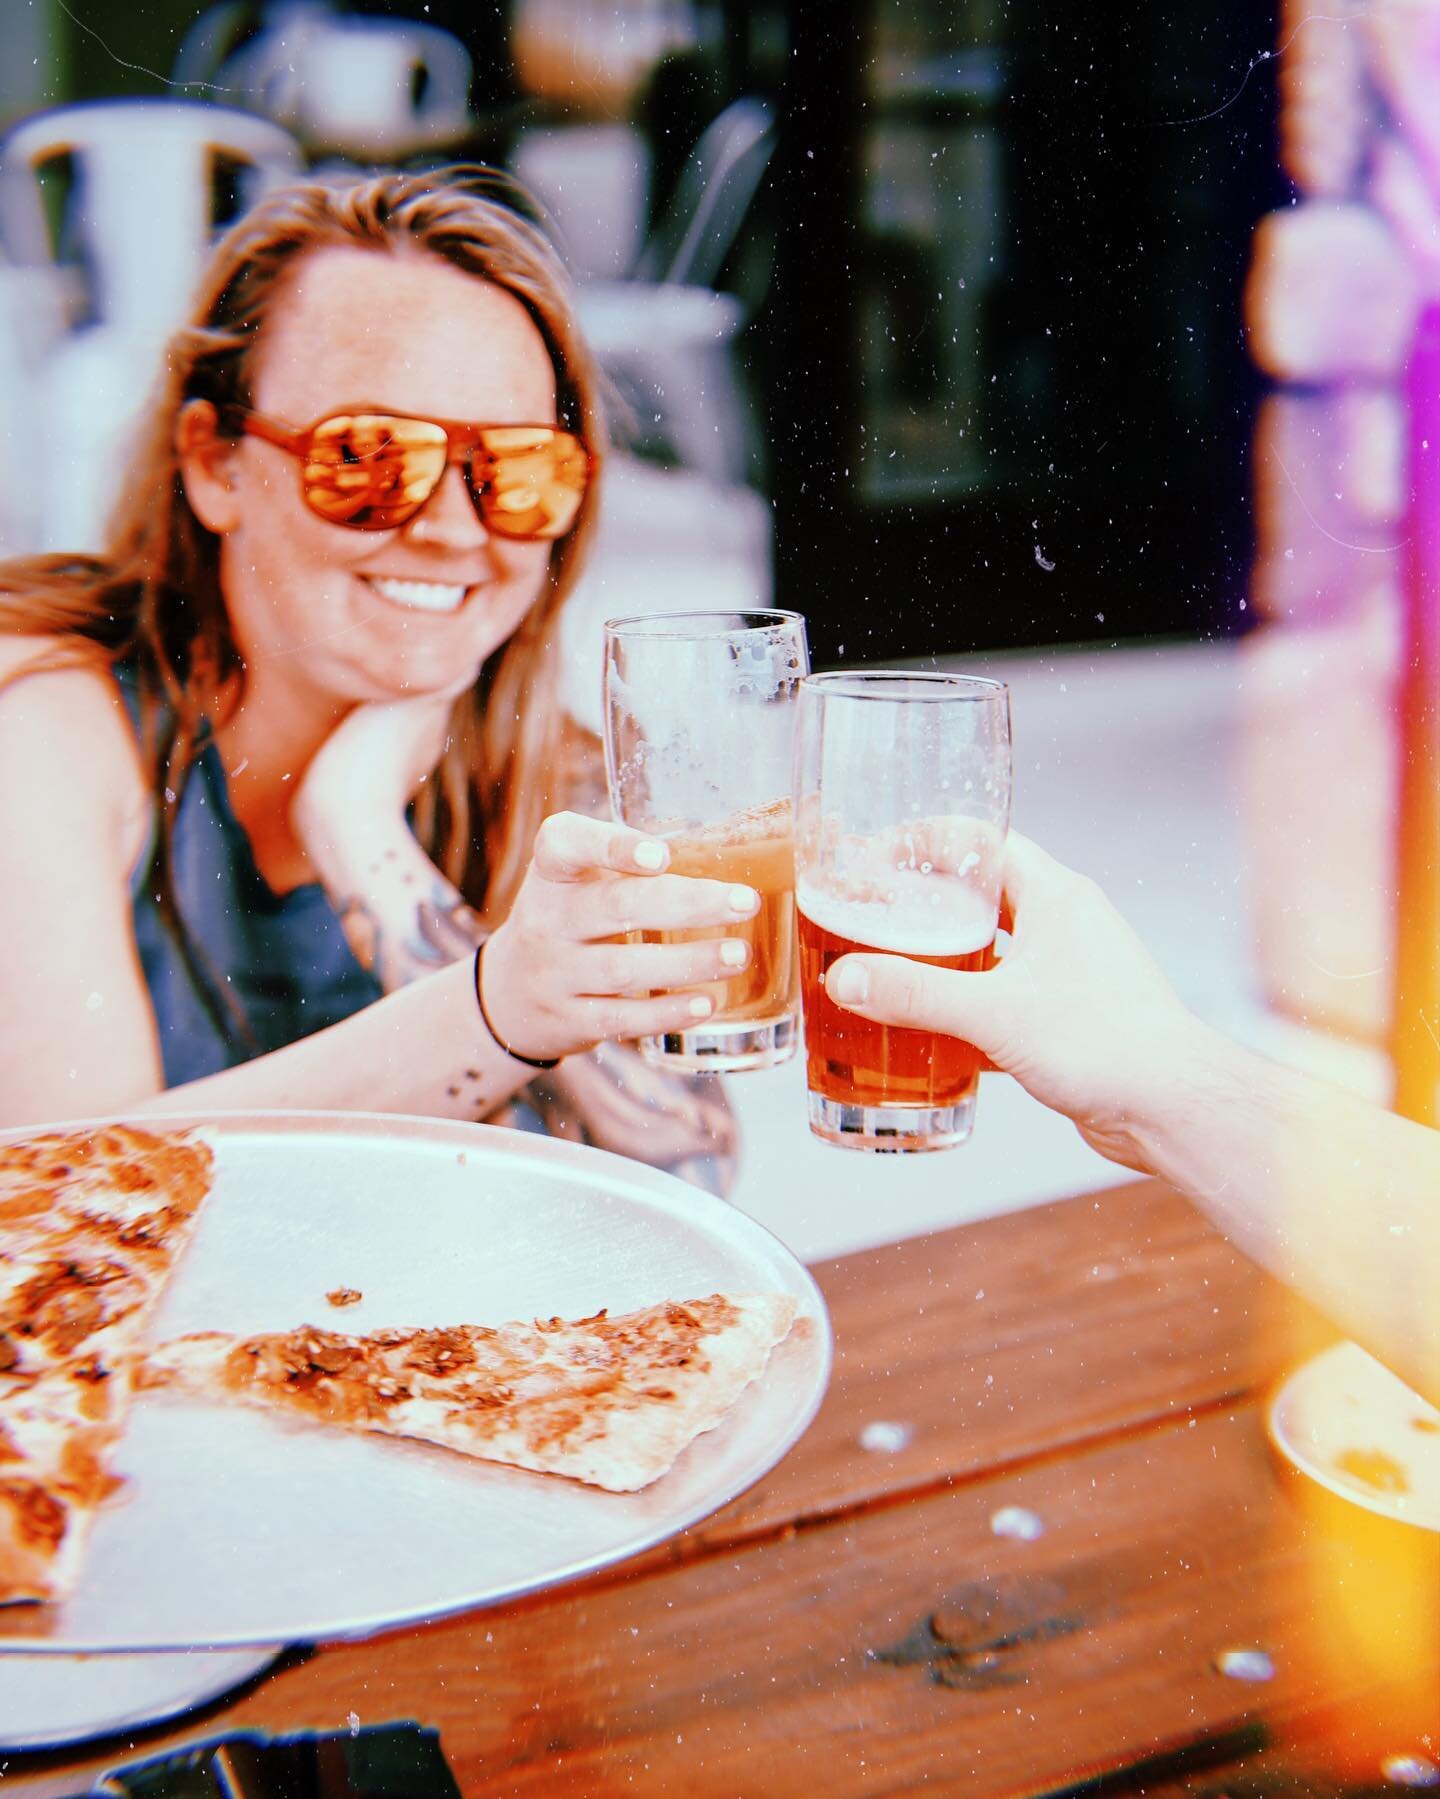 Good company + good pizza = a great time🙌🍕❤️

Tag #restorationpizza in your pizza pics for a chance to be featured on our page!
&mdash;&mdash;&mdash;&mdash;&mdash;&mdash;&mdash;&mdash;&mdash;&mdash;&mdash;&mdash;&mdash;&mdash;&mdash;&mdash;&mdash;&